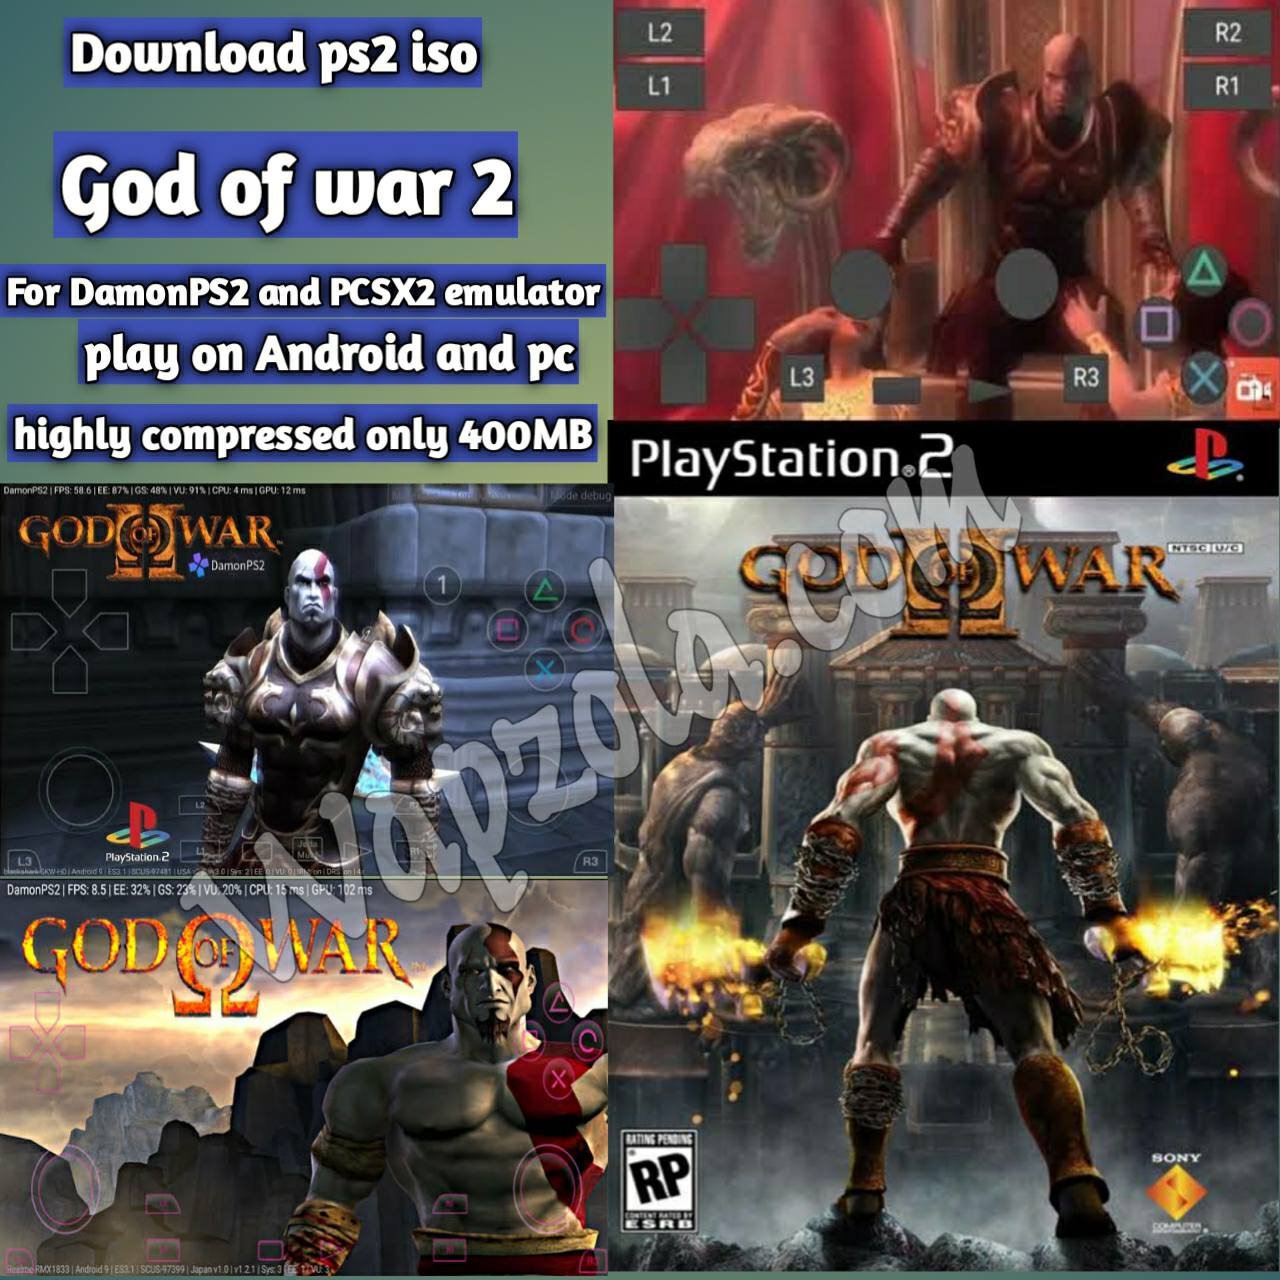 [Download] God Of War 2 DamonPS2, AetherSX2, and PCSX2 emulator – PS2 APK ISO highly compressed play Android and pc